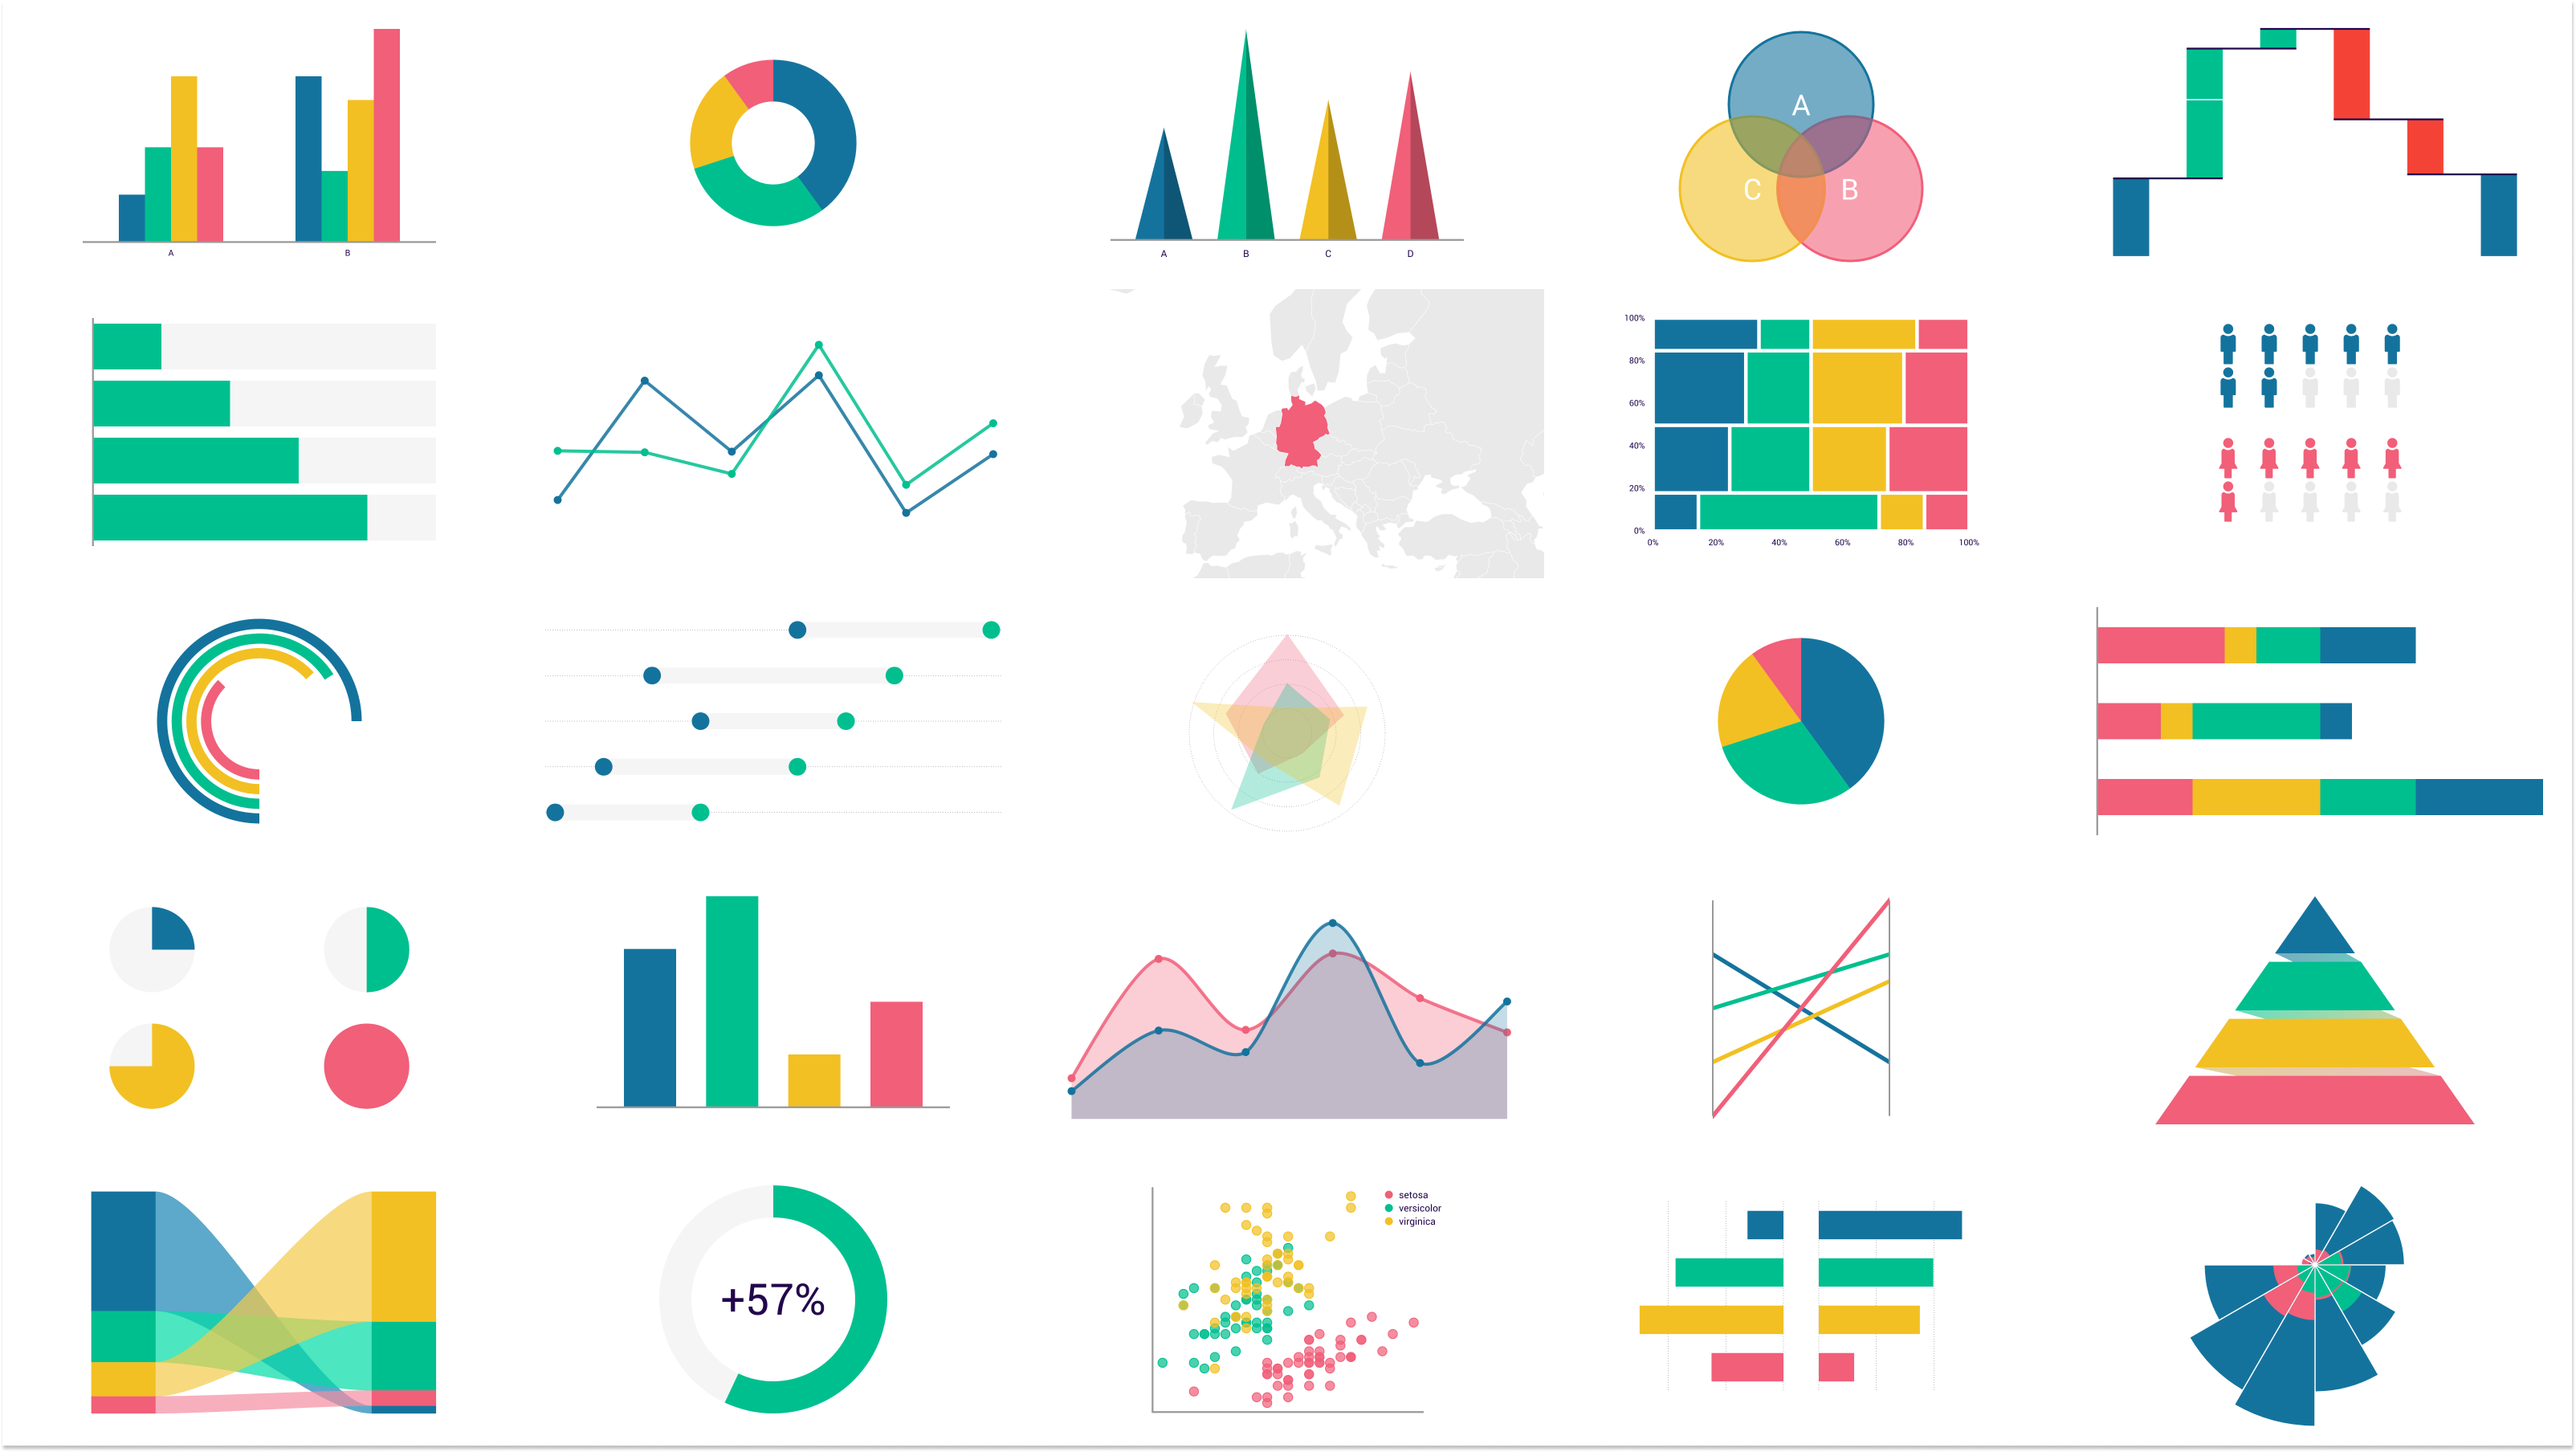 An Overview of Vizzlo's Data Visualization Tools